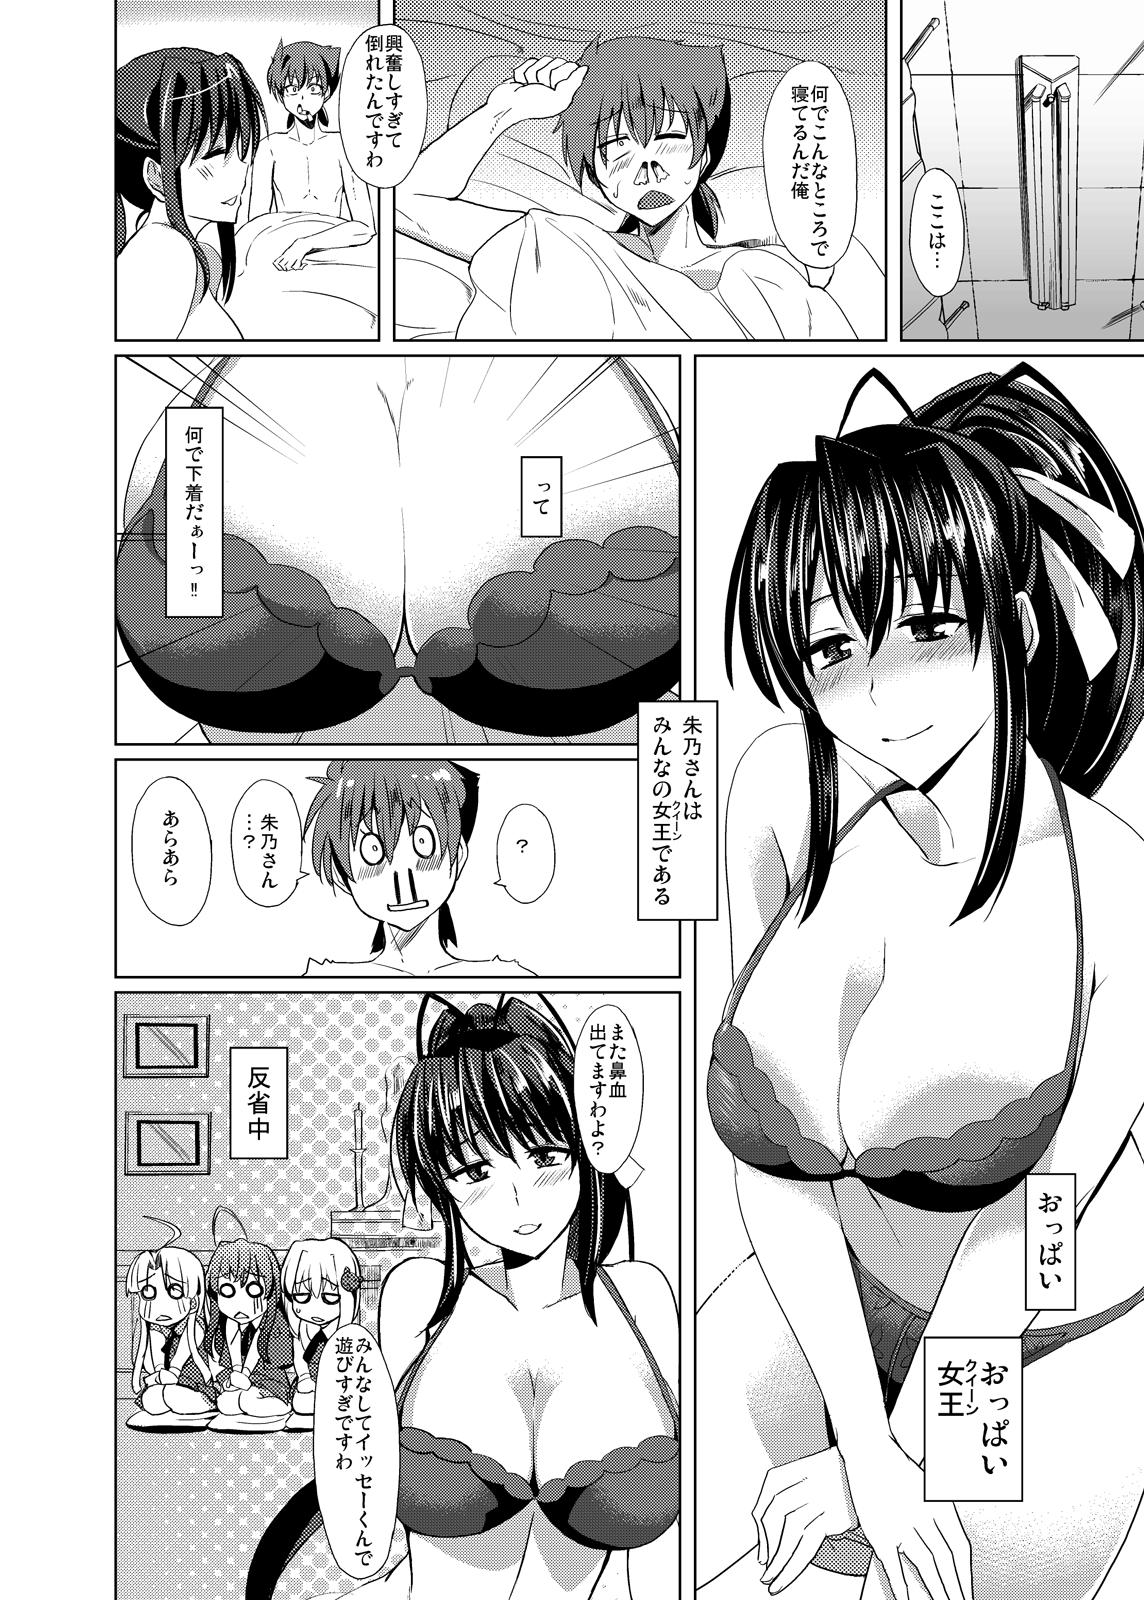 Brunet Akeno-san to DxD - Highschool dxd Cei - Page 4